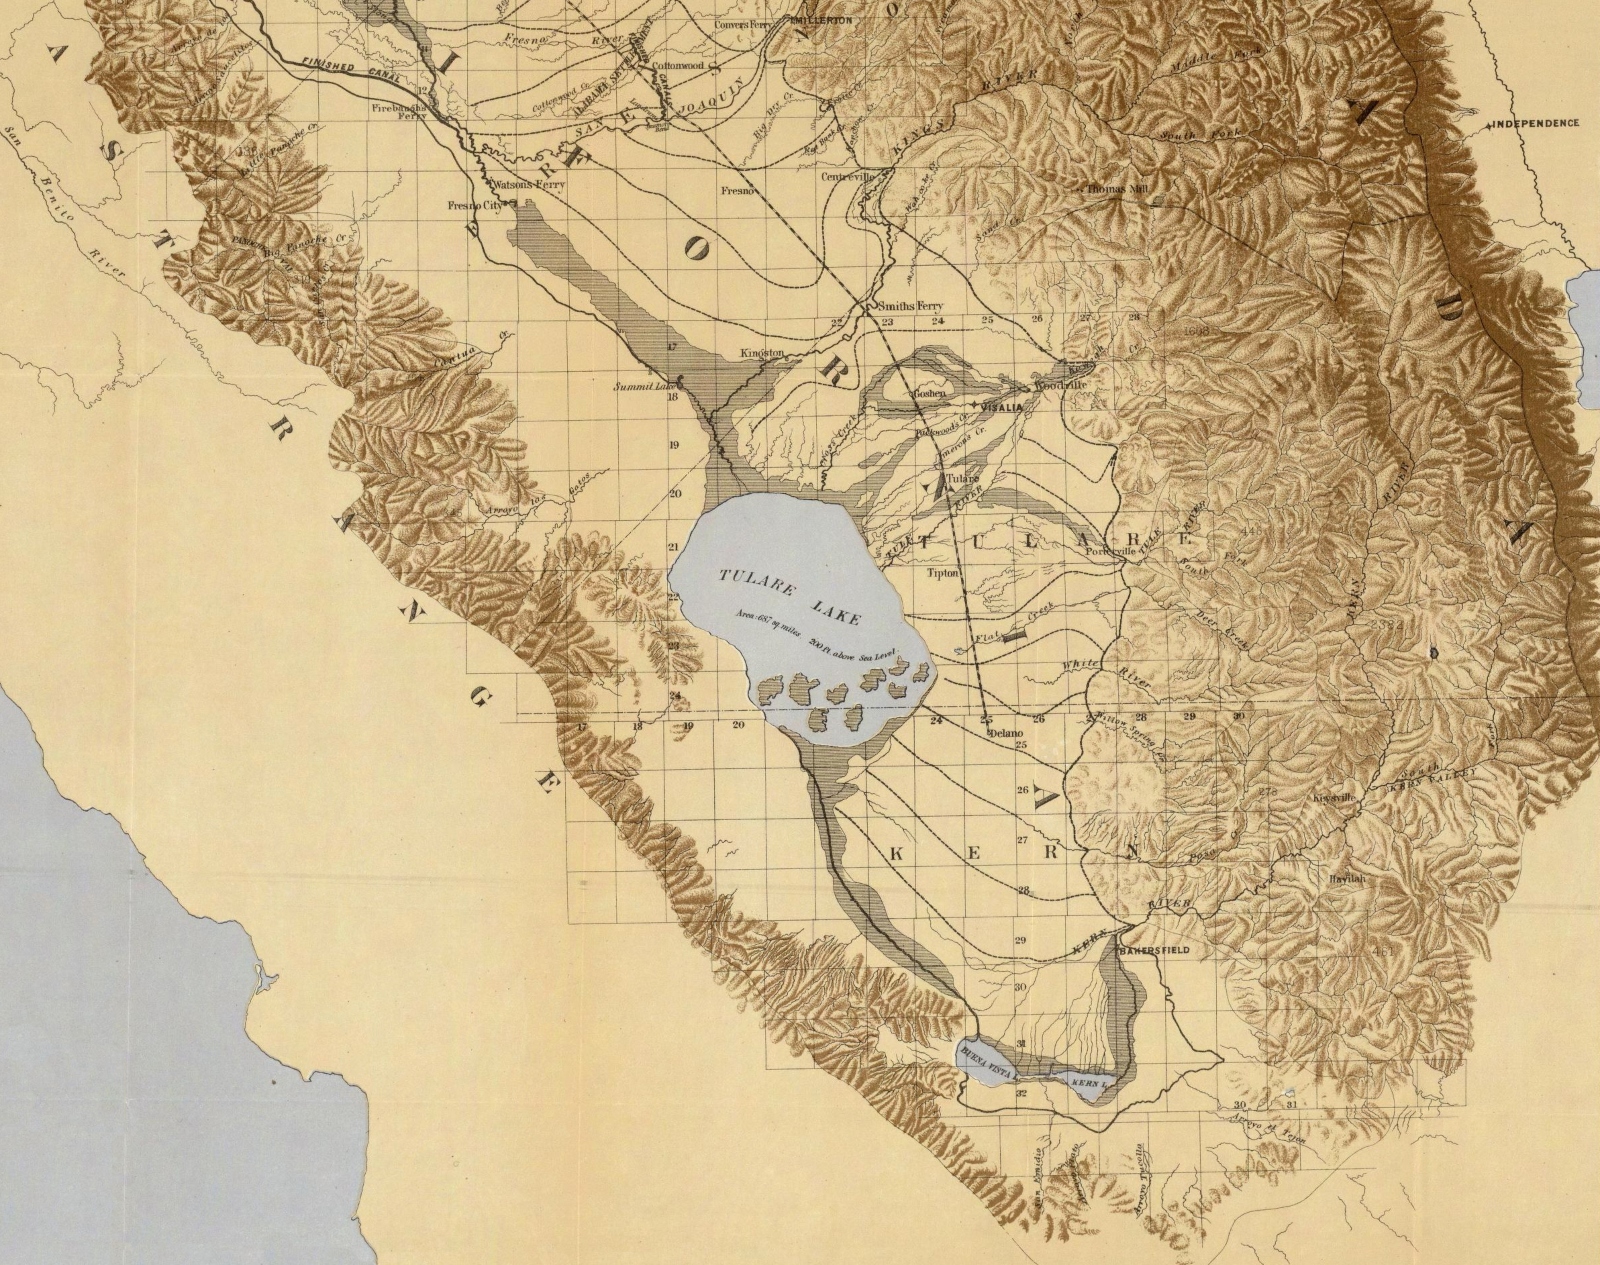 An 1873 map of California showing the former boundaries of Tulare Lake. Early American settlers drained the lake and planted crops on the dried lake bed.